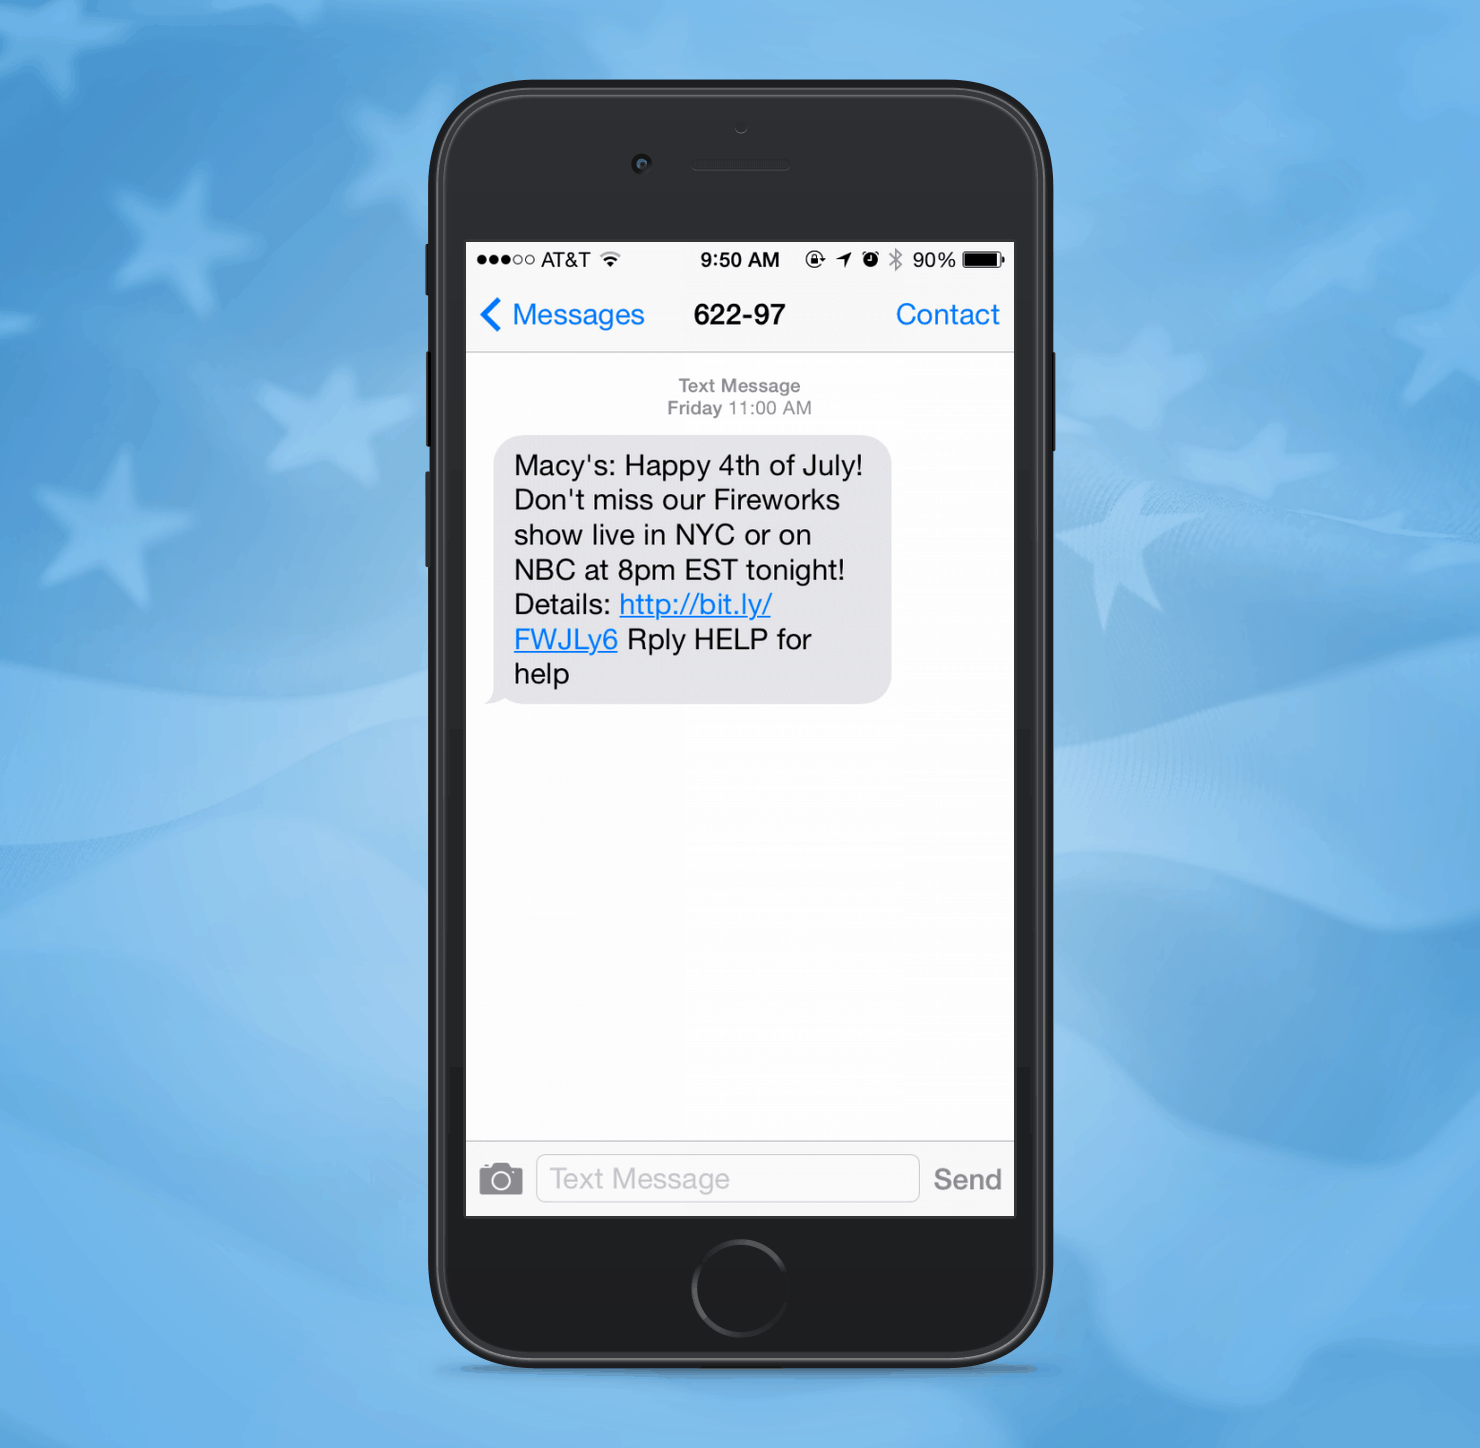 Macys SMS Promotion Example from Independence Day